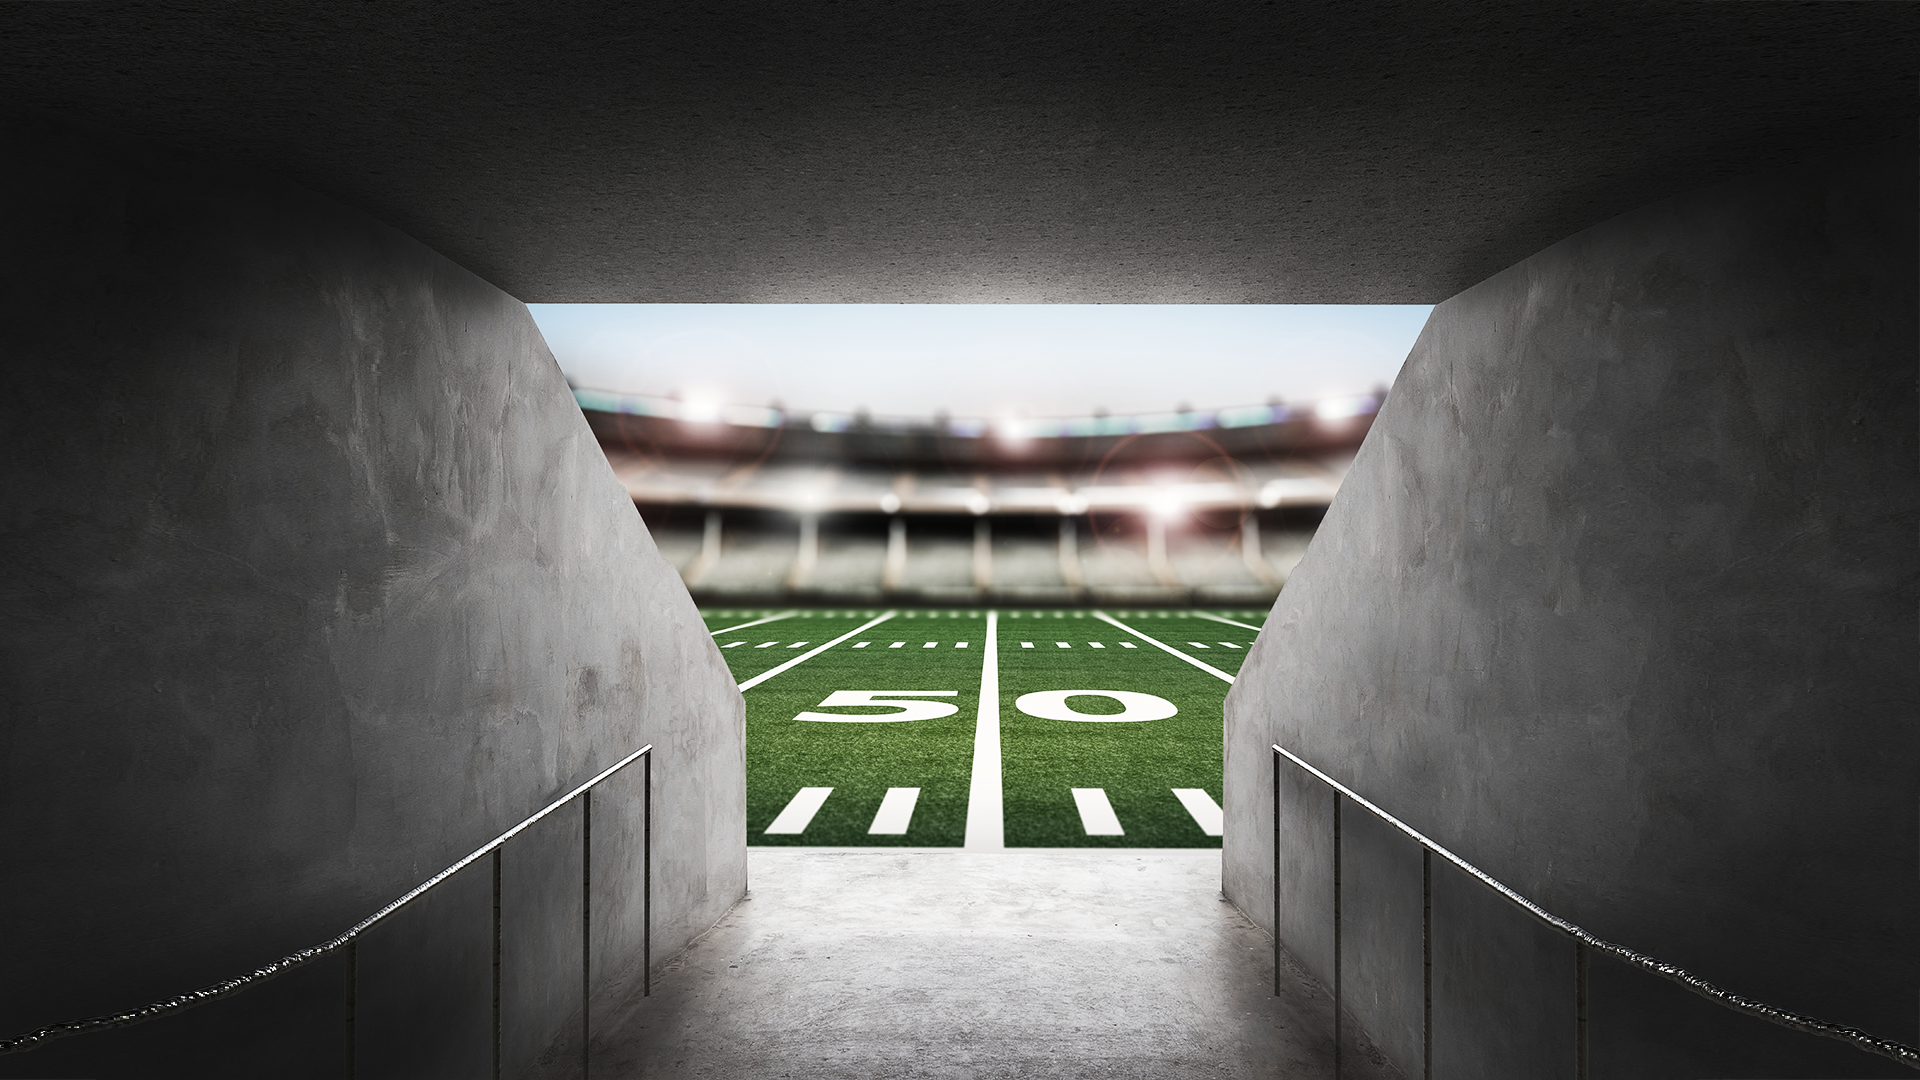 A tunnel leading to a stadium football field at the 50 yard line